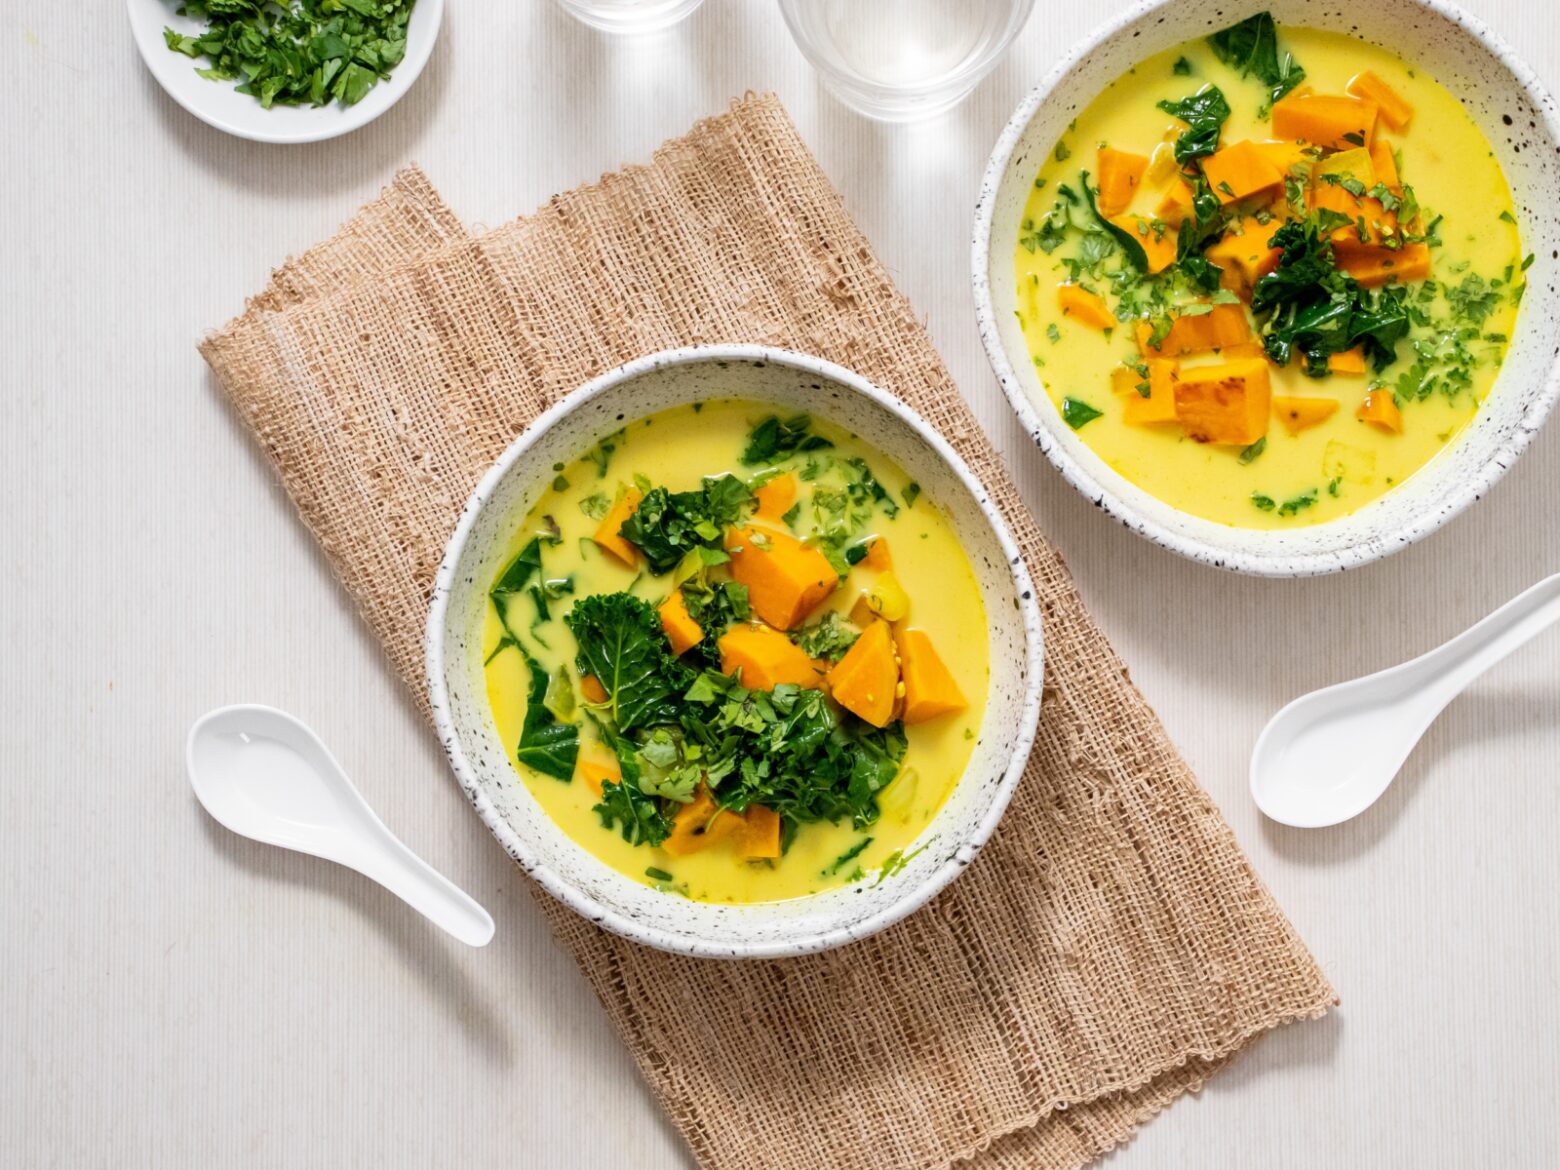 From above, two bowls of sweet potato turmeric soup, one on a folded burlap table cloth, surrounded by a small bowl of chopped cilantro and two white soup spoons.